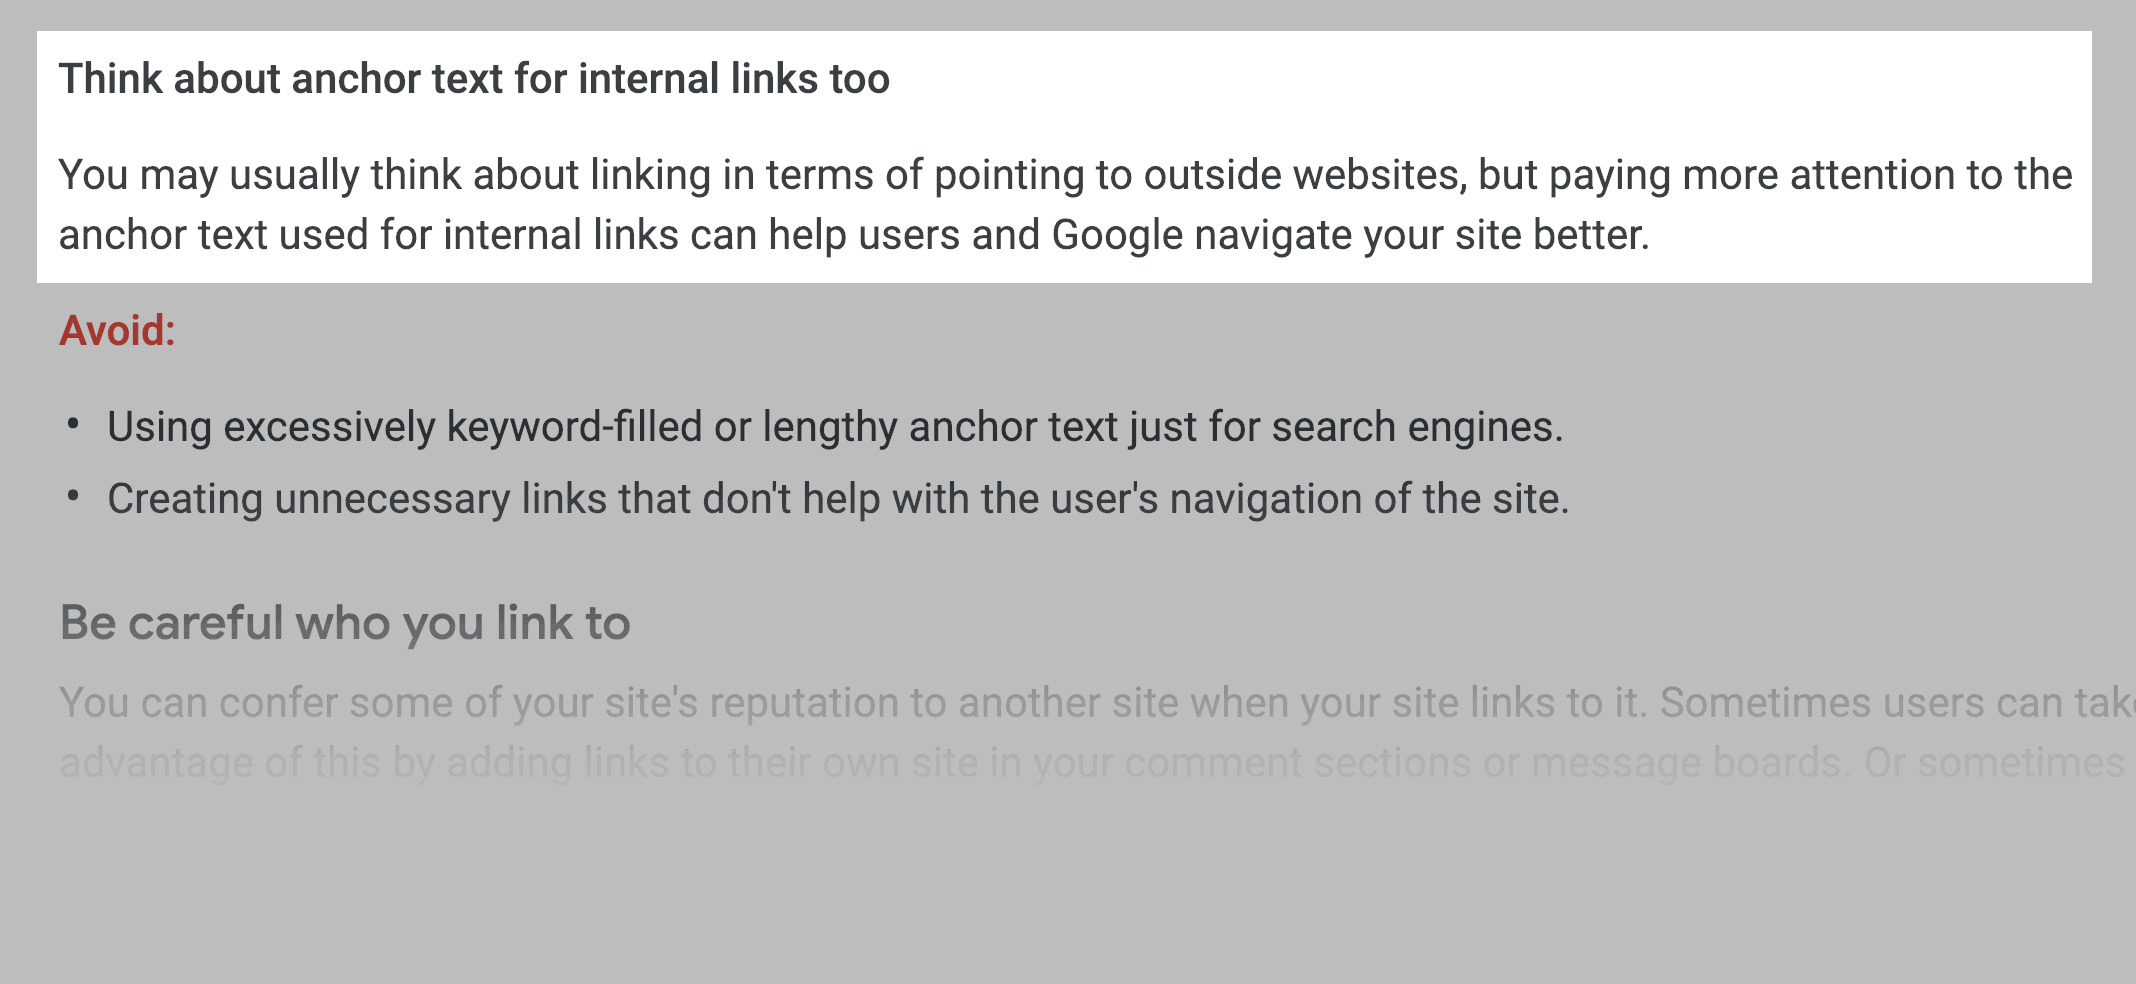 Google recommends that you use keywords in your anchor text